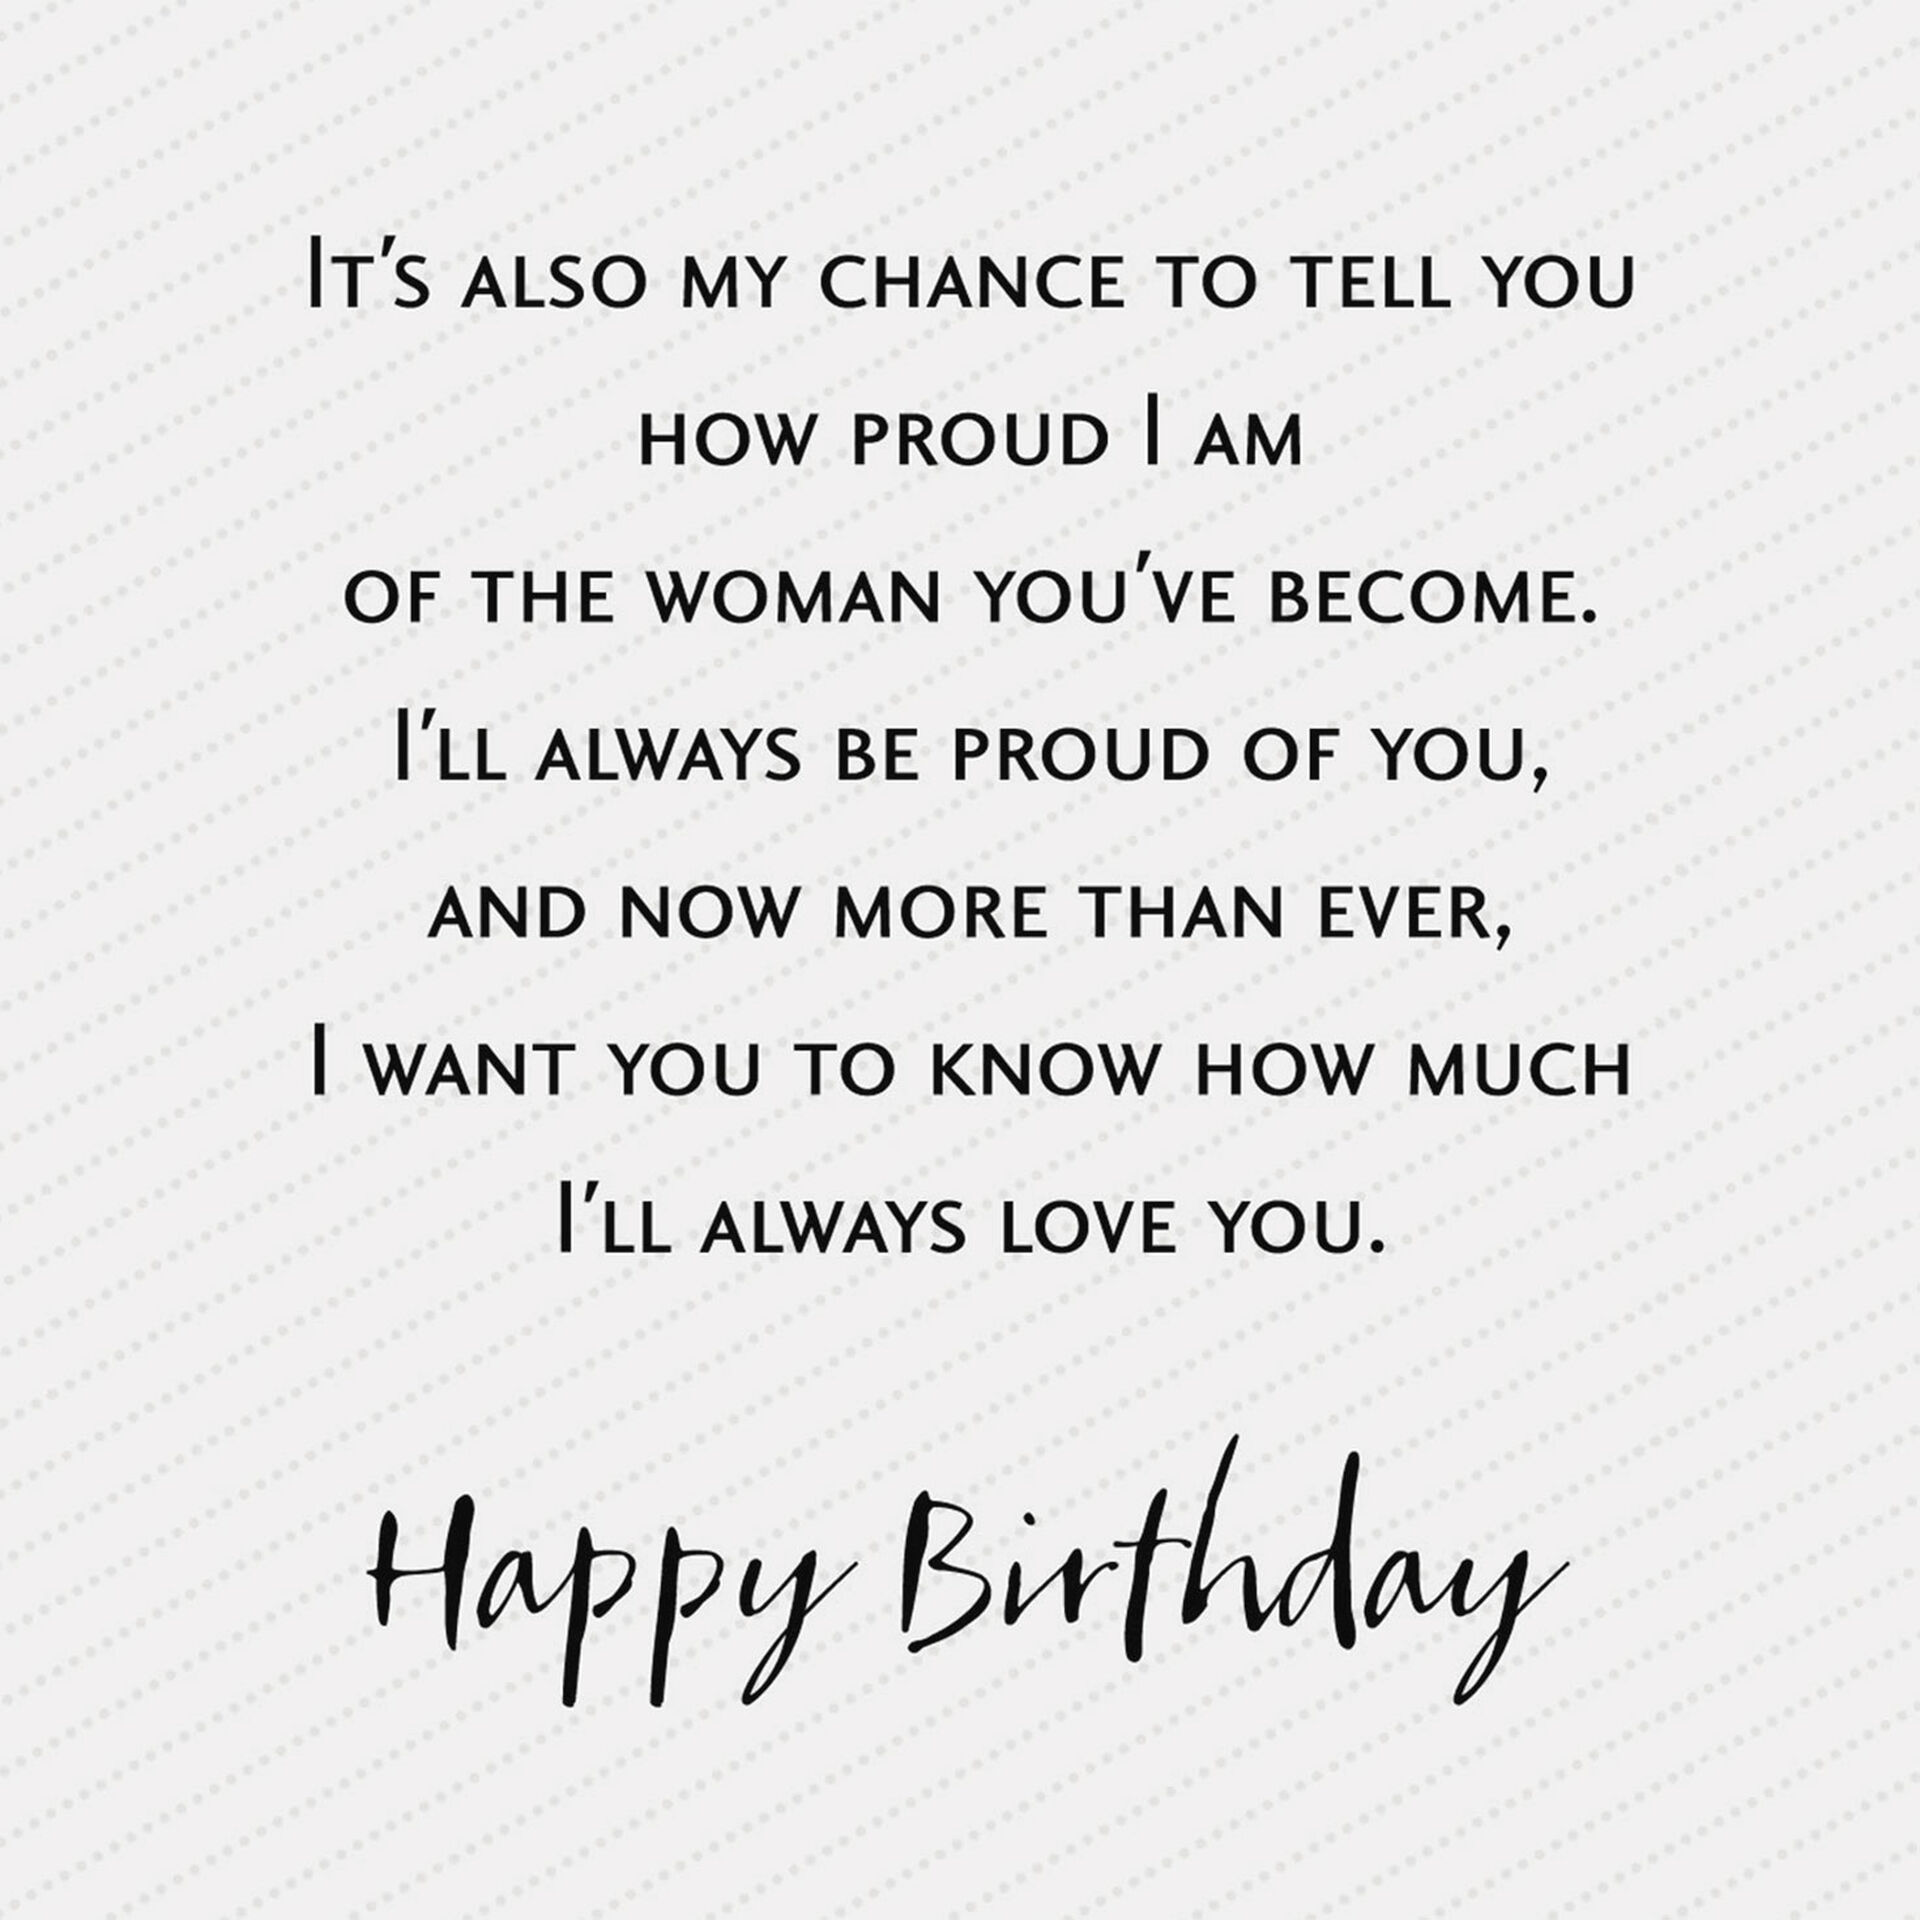 Proud-of-the-Woman-Youve-Become-Birthday-Card_299MHB1638_02